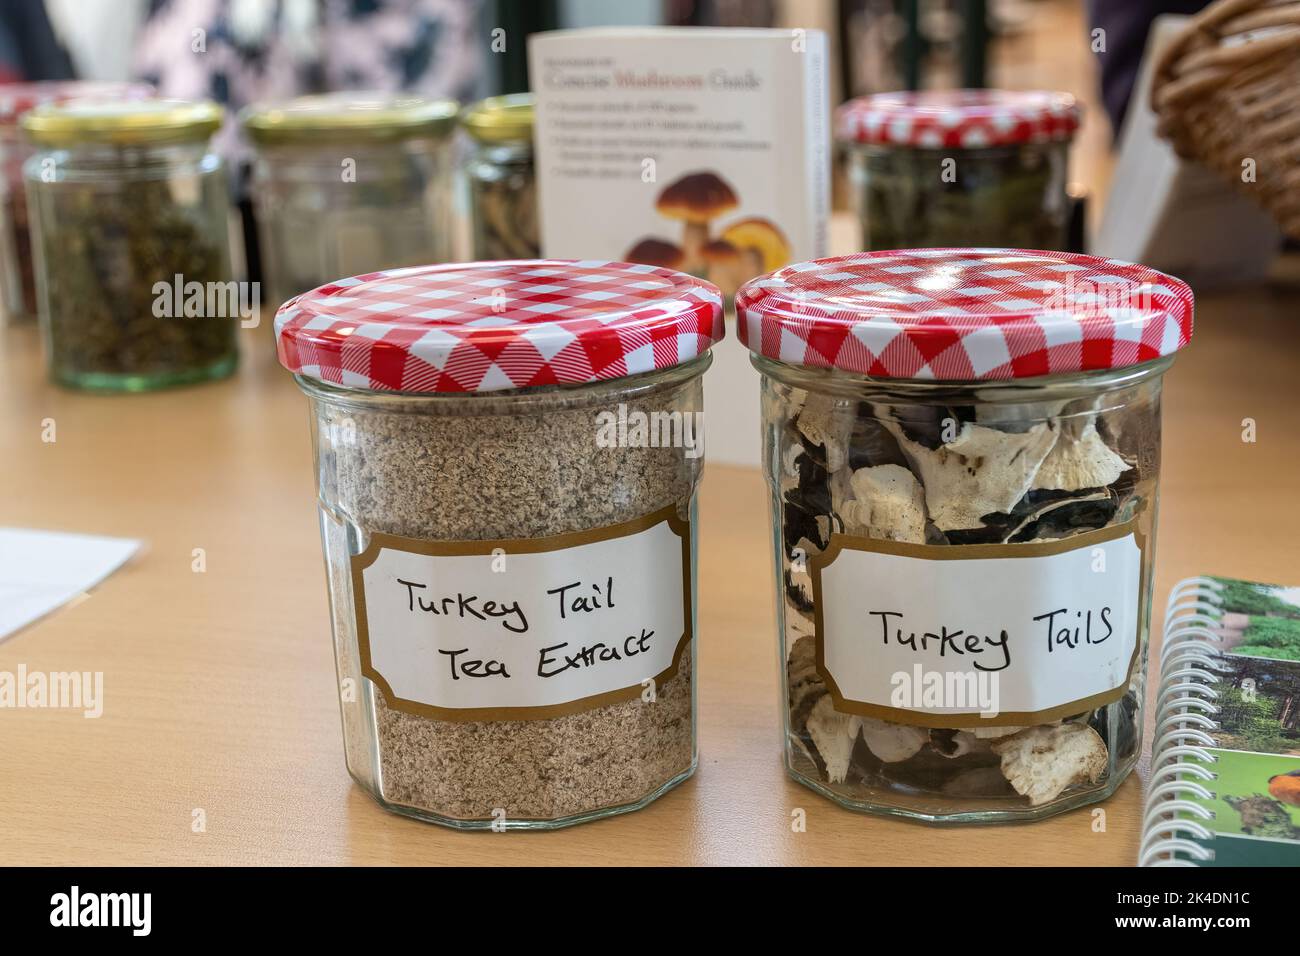 Jars of foraged turkey tail mushrooms or fungi, and powdered turkey tails made into a tea extract for medicinal use, UK Stock Photo